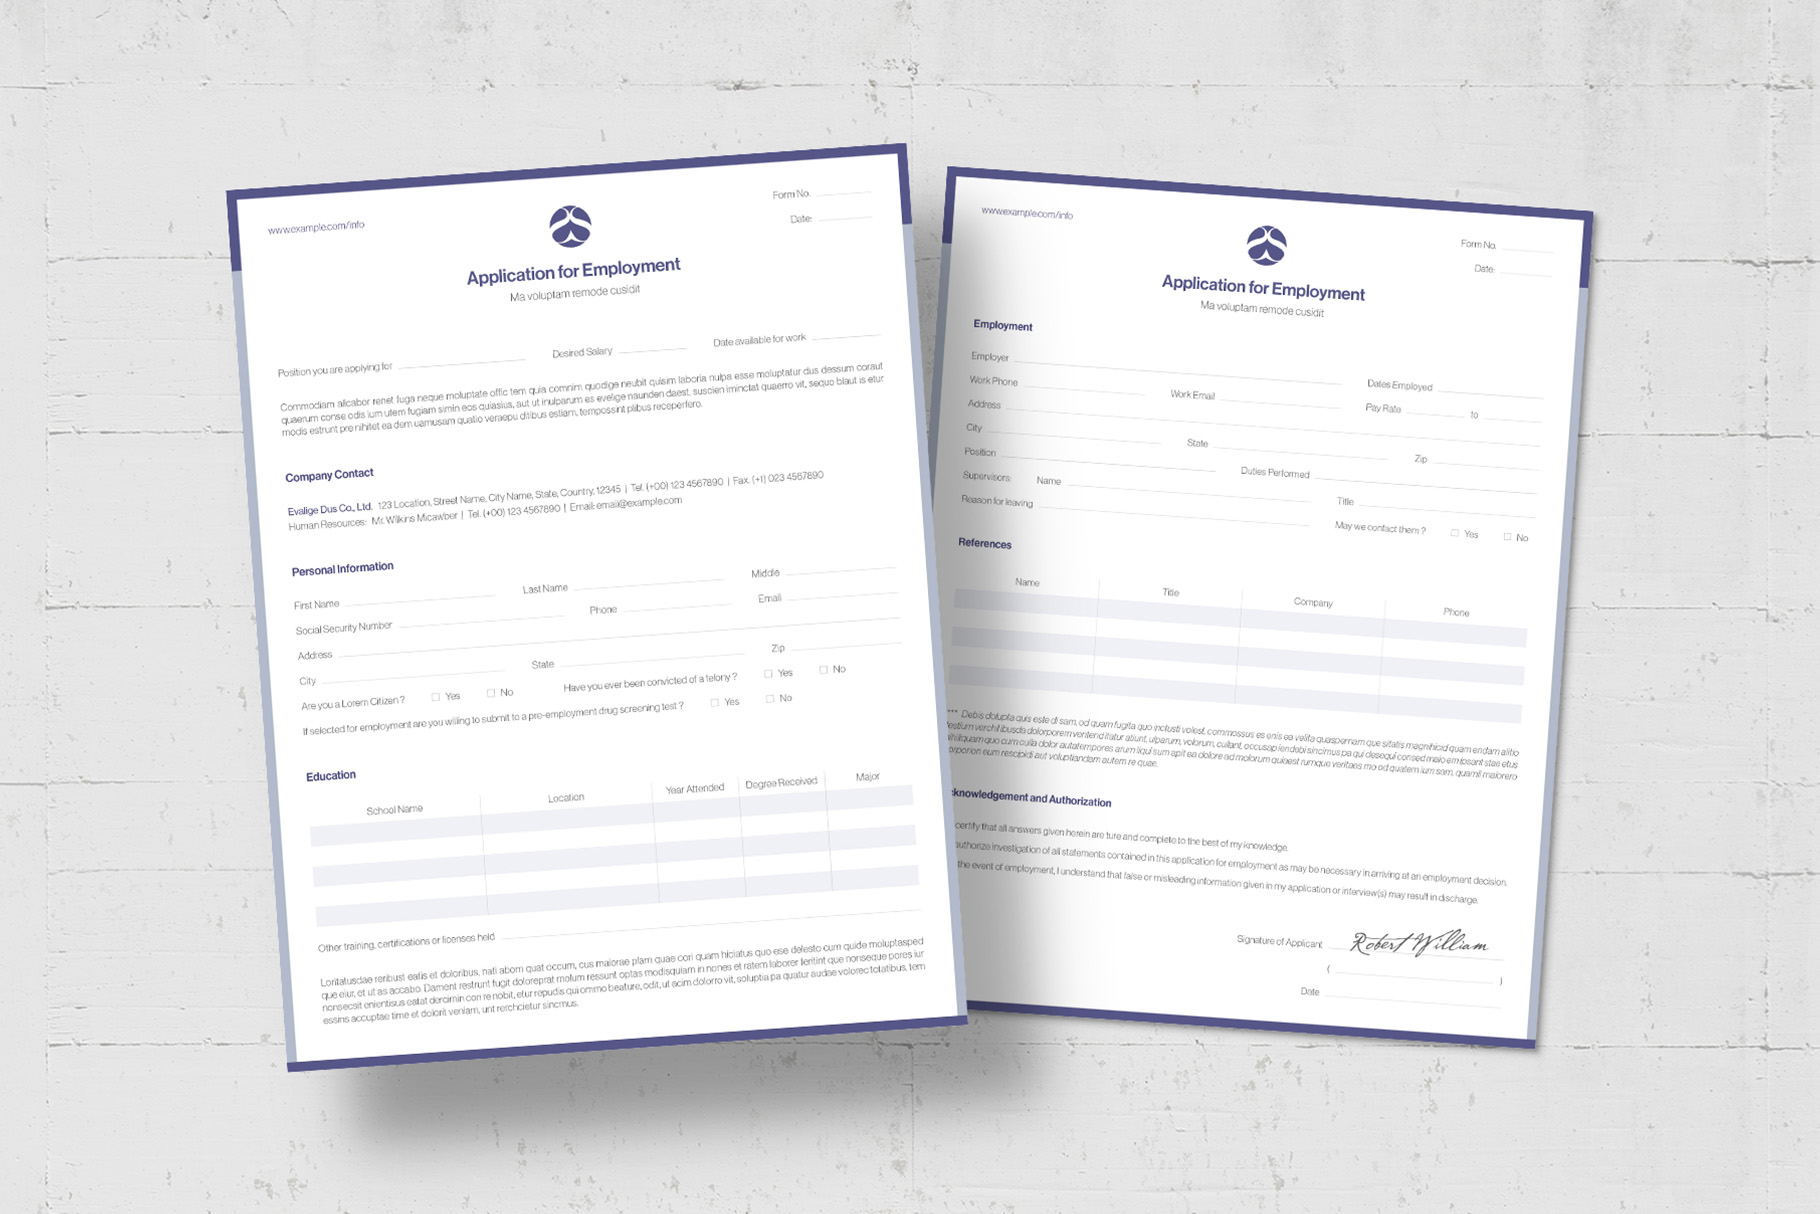 Employee Personal Information Form in INDD format